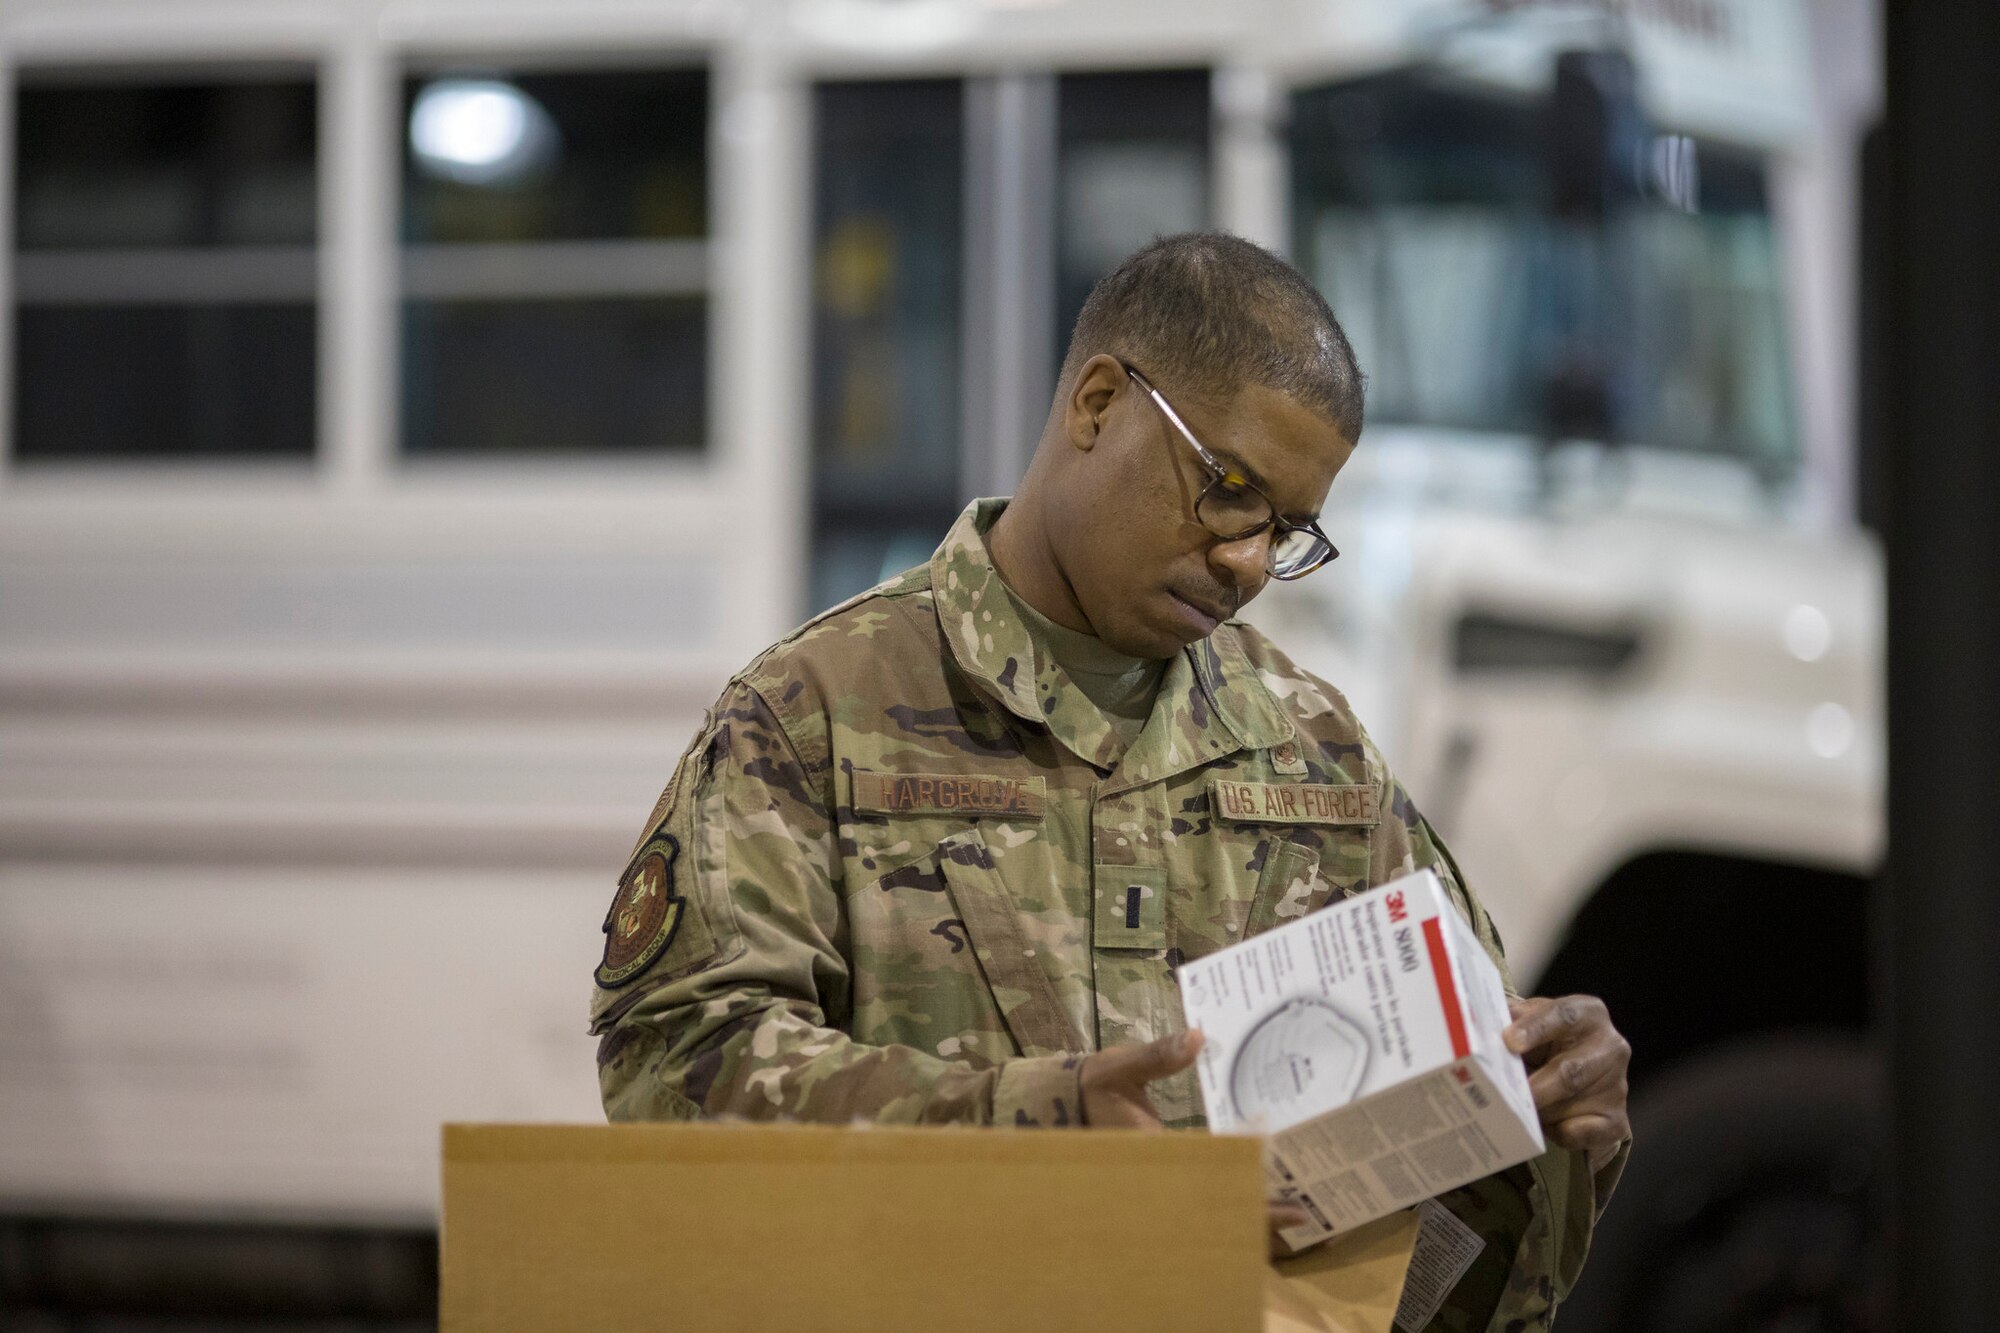 U.S. Air Force 1st Lt. Tyrell Hargrove with the Delaware National Guard inspects personal protective equipment inside Delaware Emergency Management Agency headquarters, Smyrna, Del., March 27, 2020. Hargrove is helping evaluate sites that can be used as acute care facilities should hospitals become overwhelmed with COVID-19 patients.